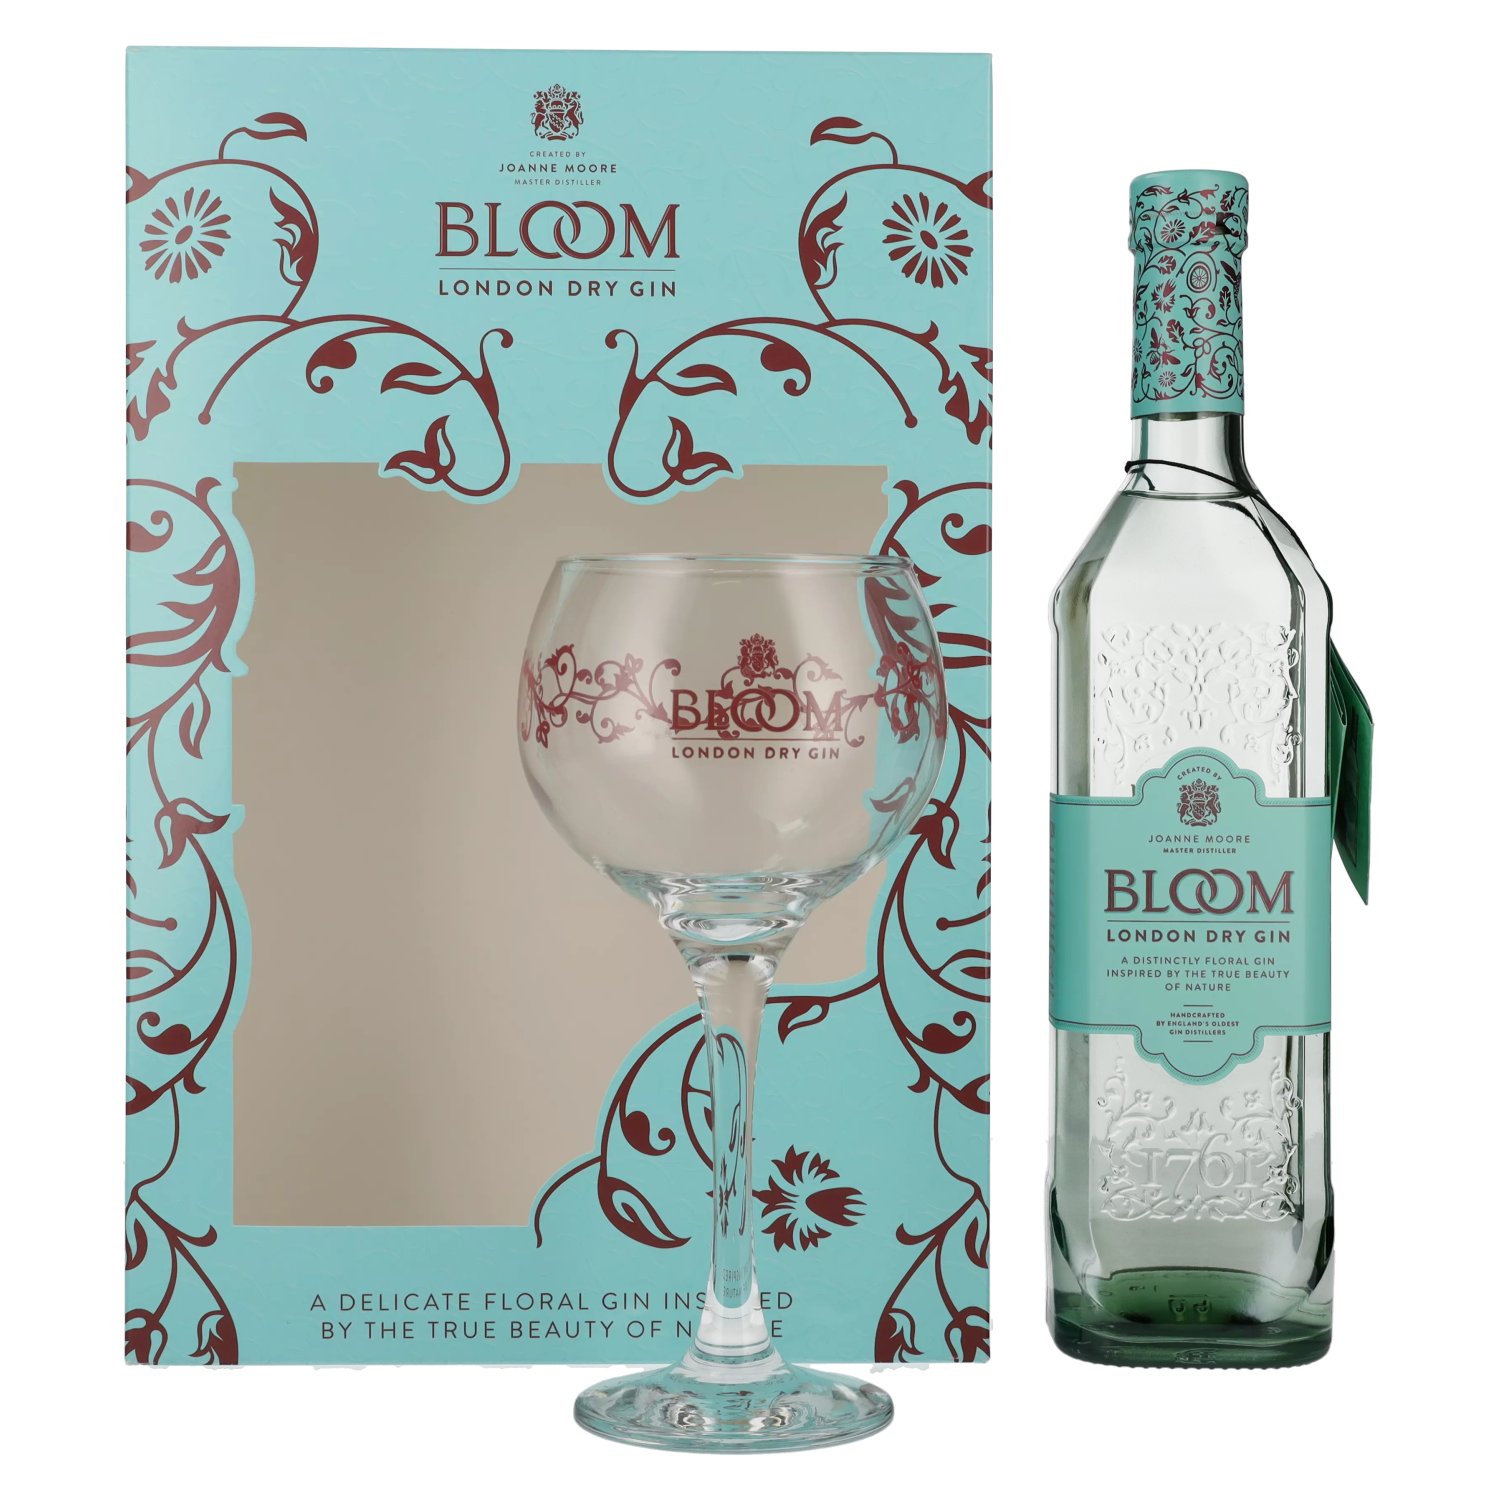 Bloom London Dry Gin 40% with Vol. glass Giftbox 0,7l in